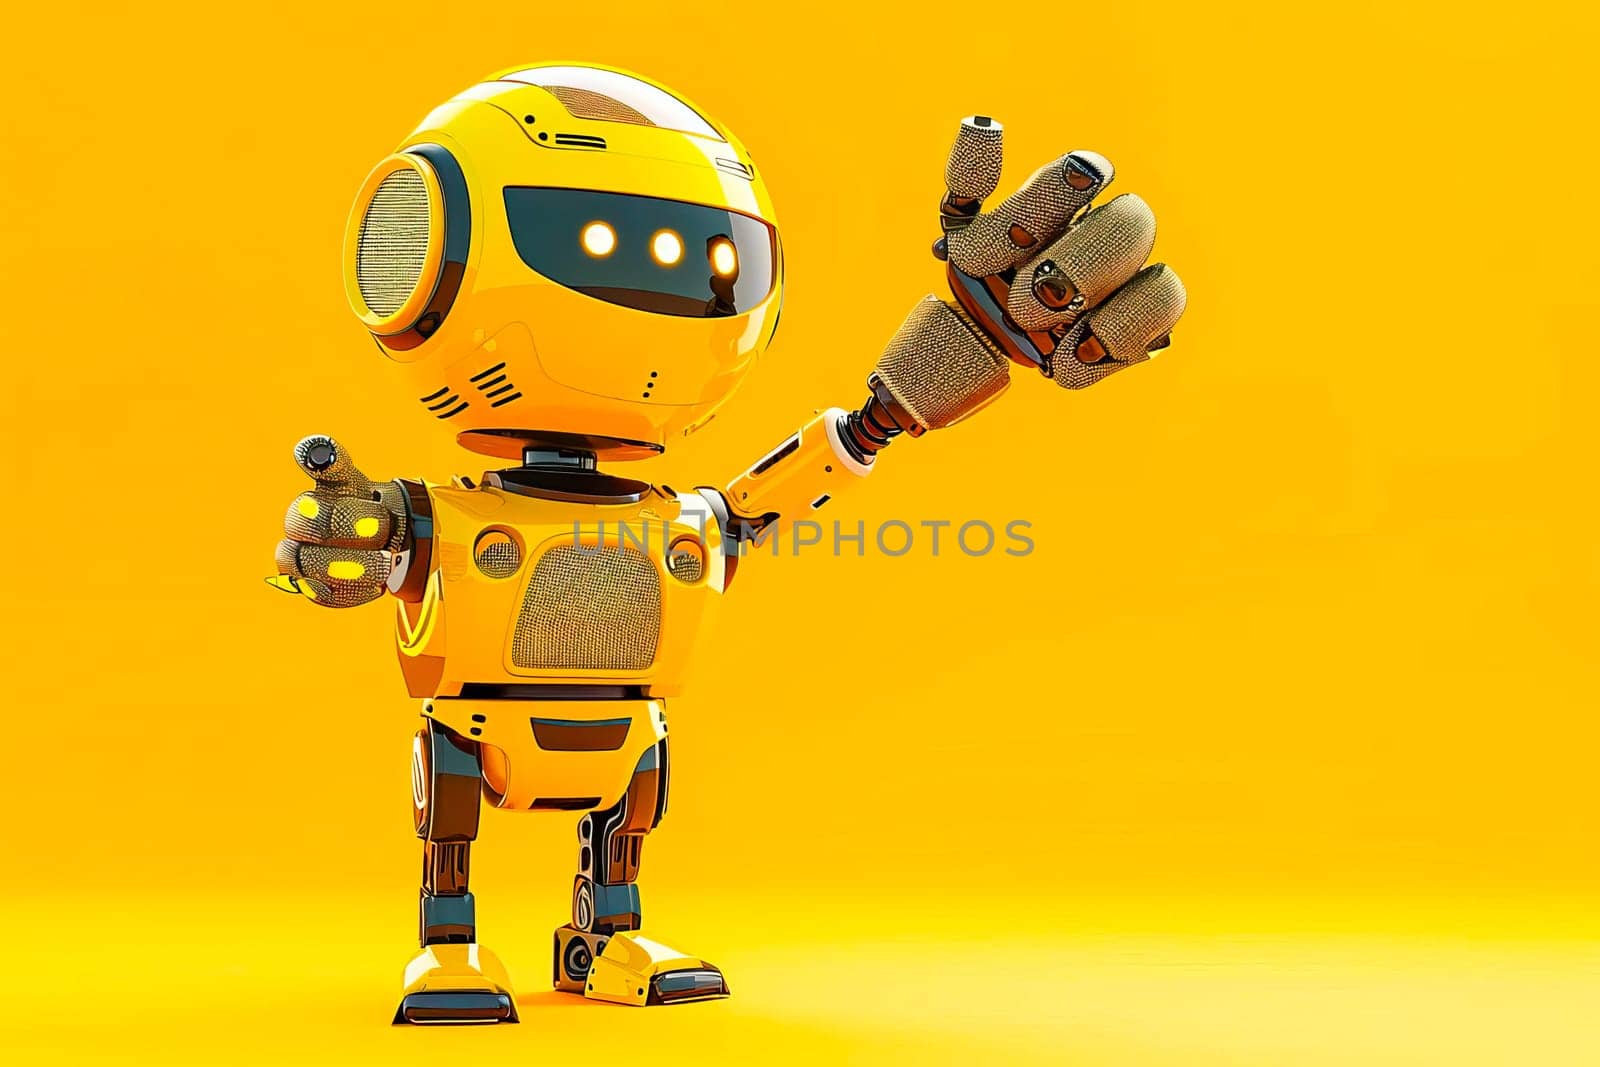 A cute robot with a yellow background enthusiastically giving a thumbs up gesture. by vladimka